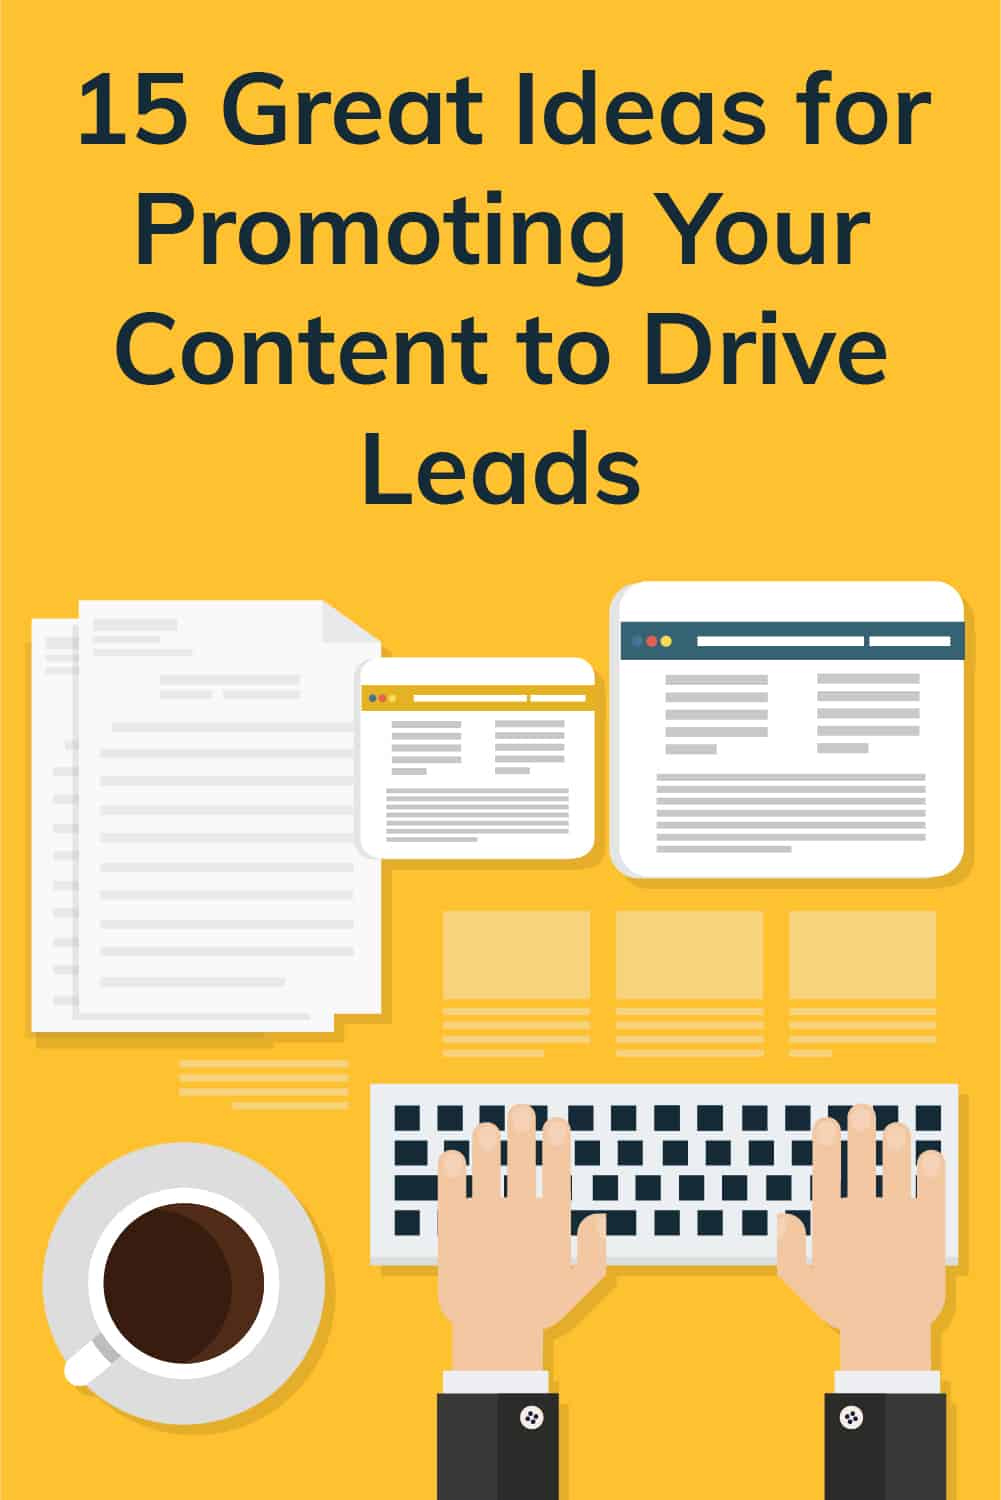 Promoting your content and generating leads doesn’t need to be difficult. The ideas here will help you jump-start your content game! via @scopedesign